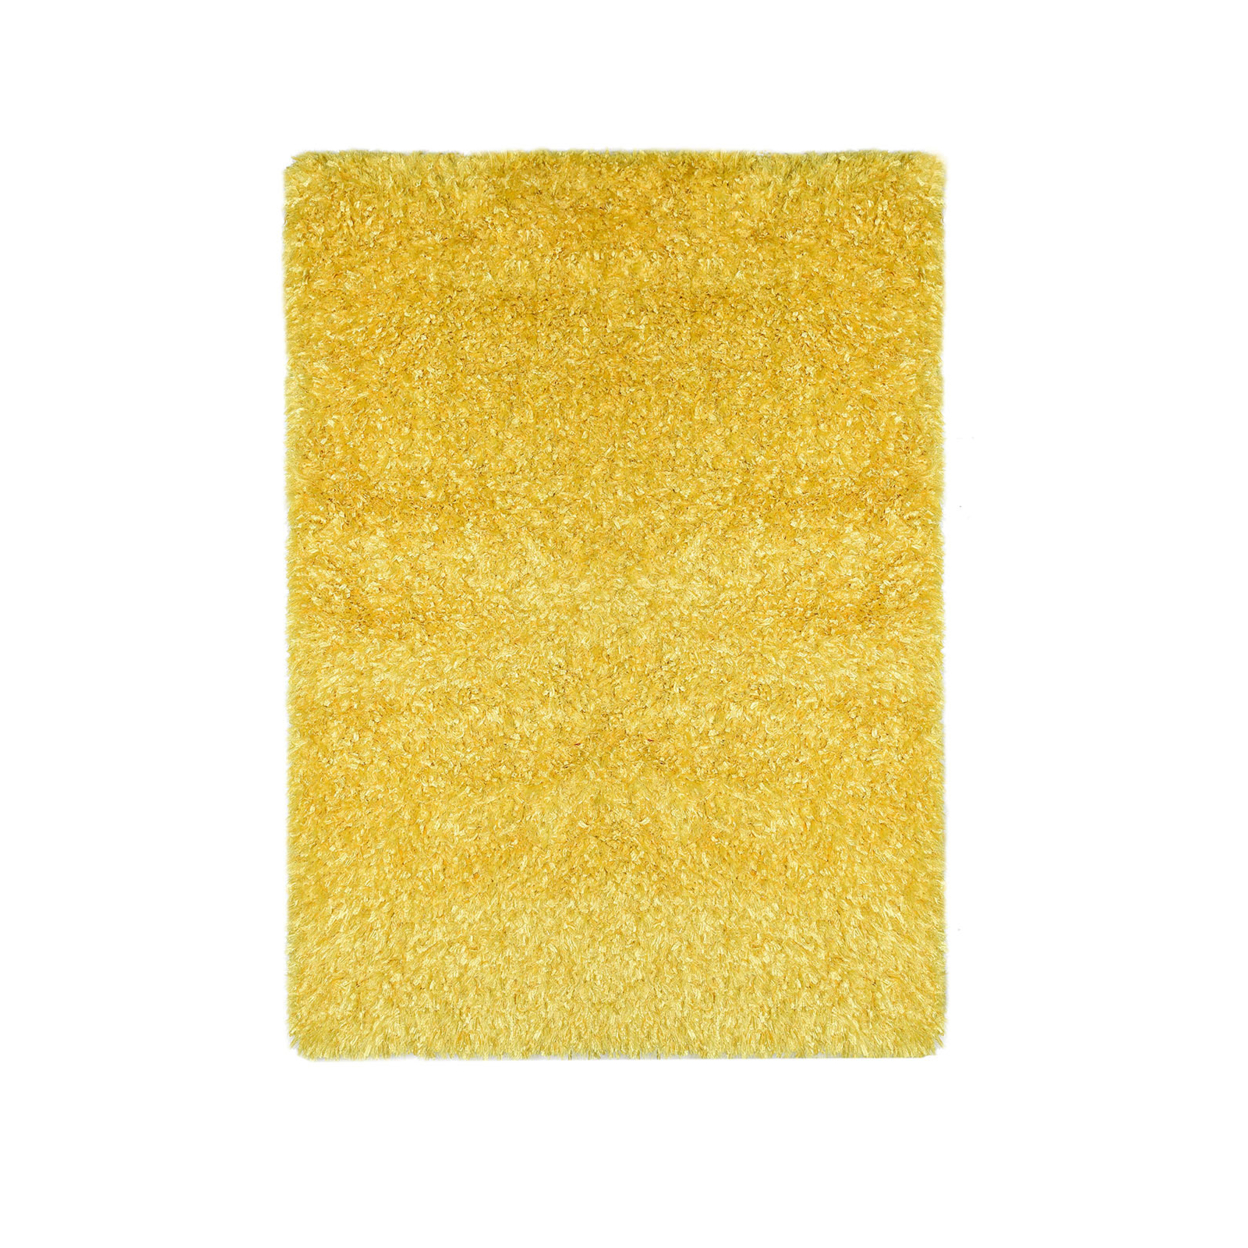 Contemporary Style Polyester Area Rug With Cotton Backing, Yellow- Saltoro Sherpi